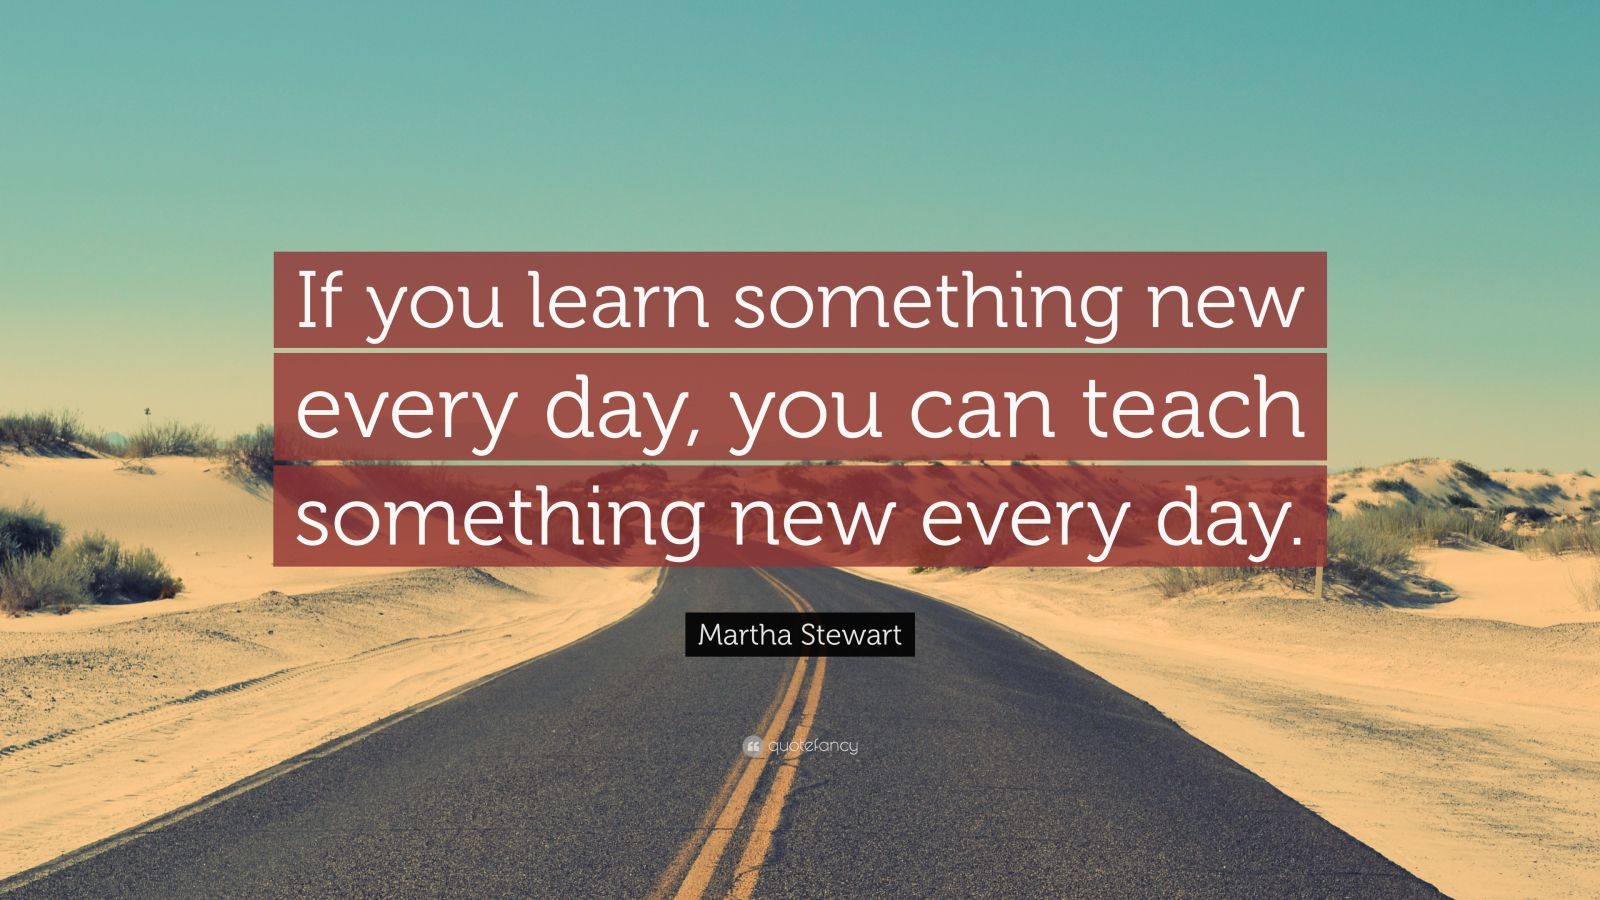 Martha Stewart Quote “if You Learn Something New Every Day You Can Teach Something New Every